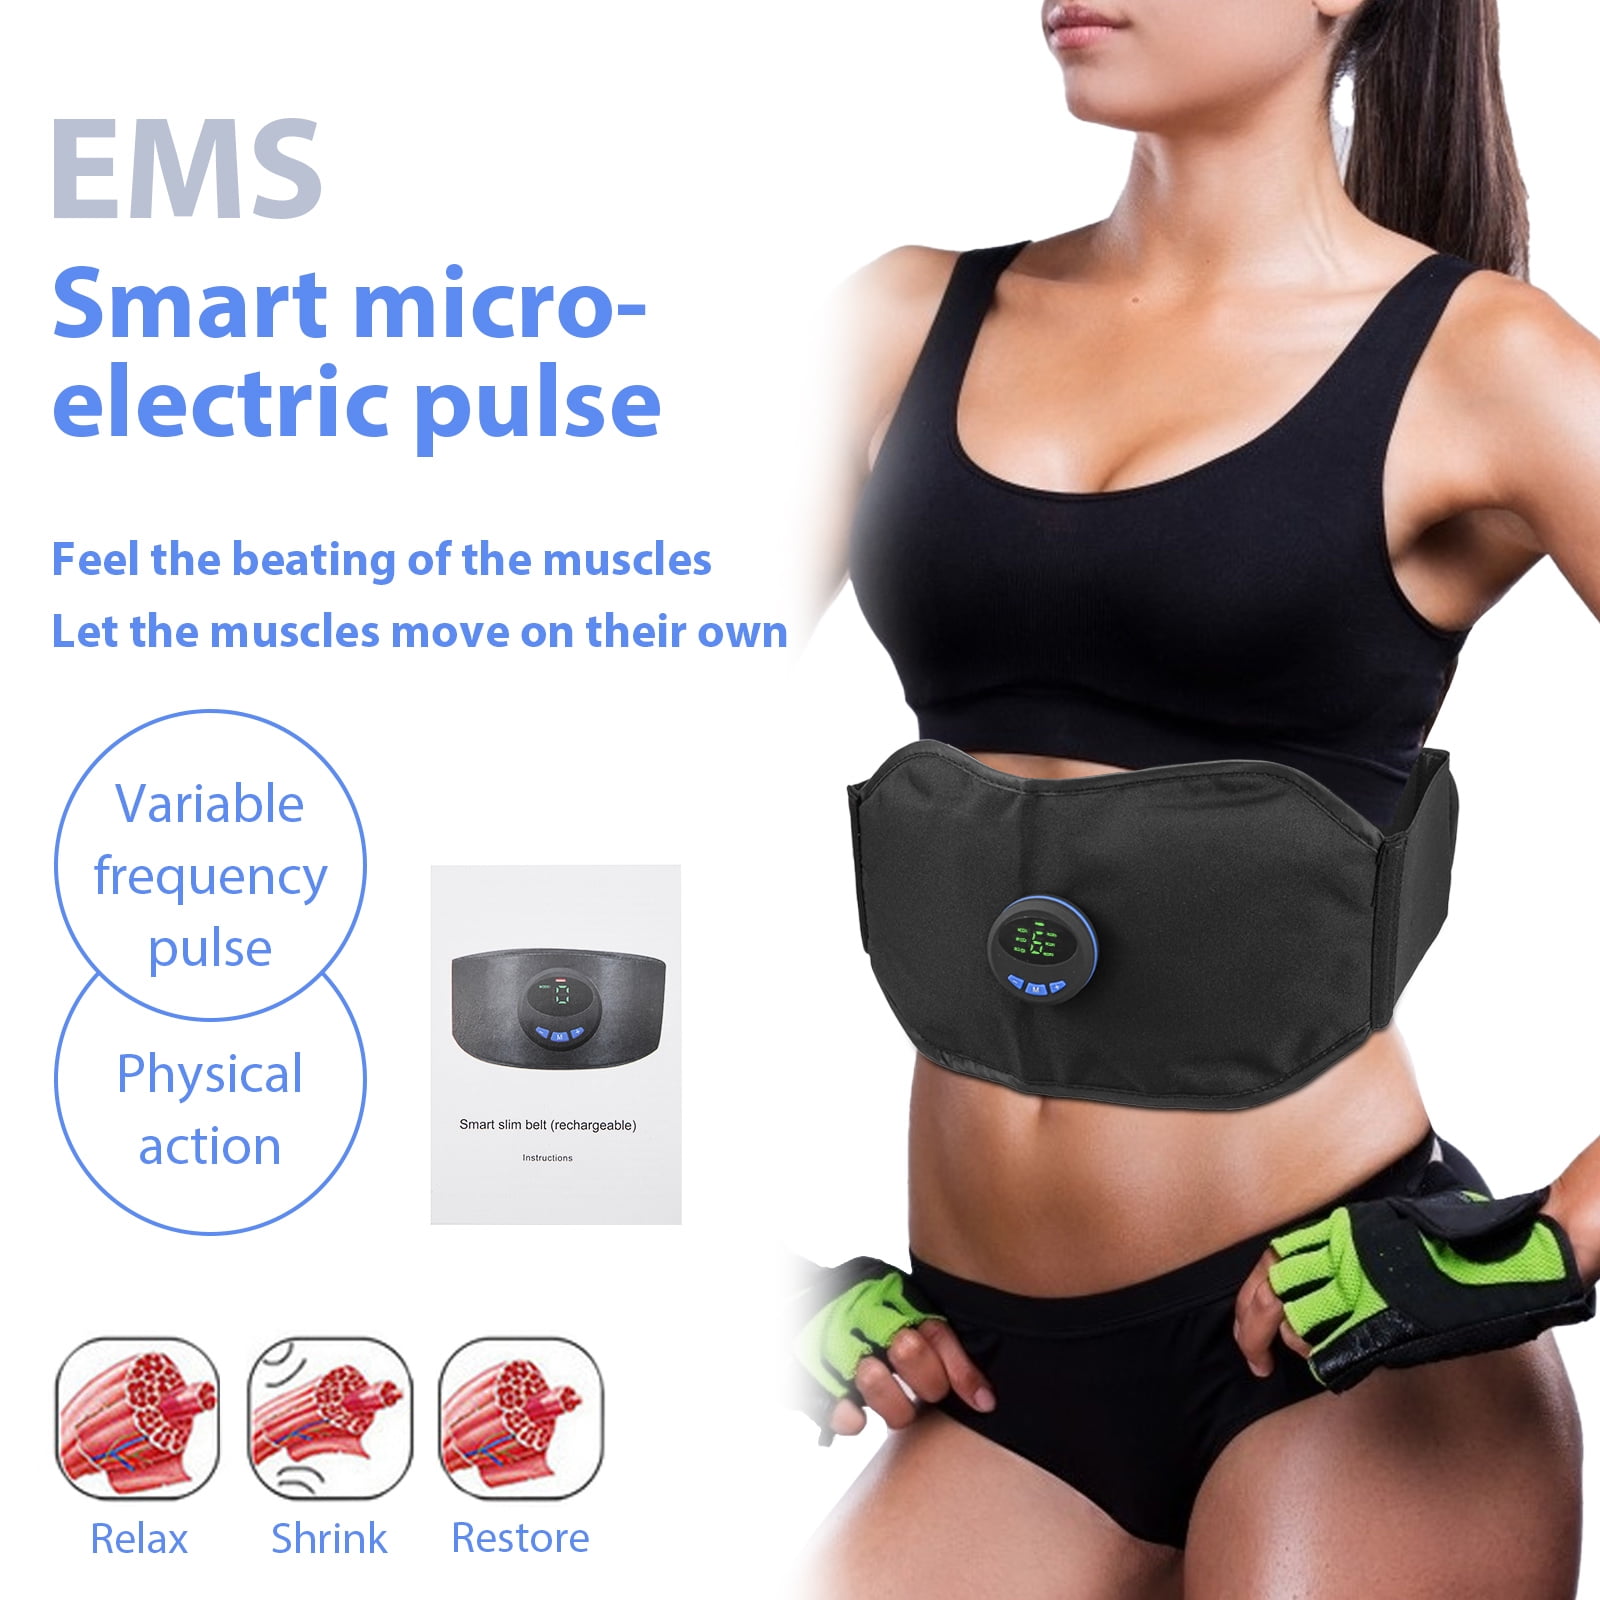 Ab Belt Abs Stimulator Electronic Abdominal Muscle Stimulator Toning Belt for Men and Women Abs Trainer Muscle Toner